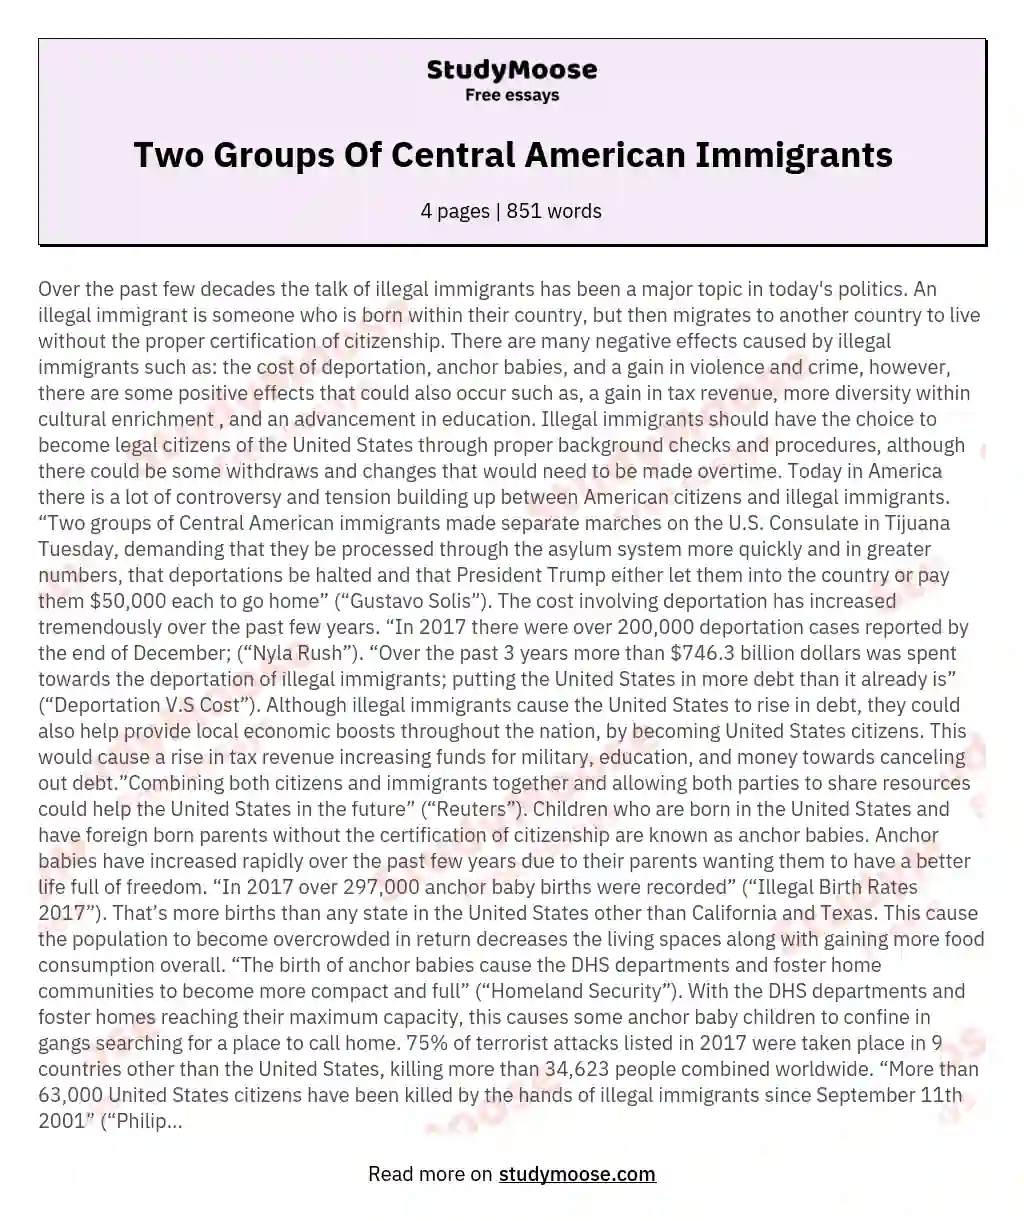 Two Groups Of Central American Immigrants essay